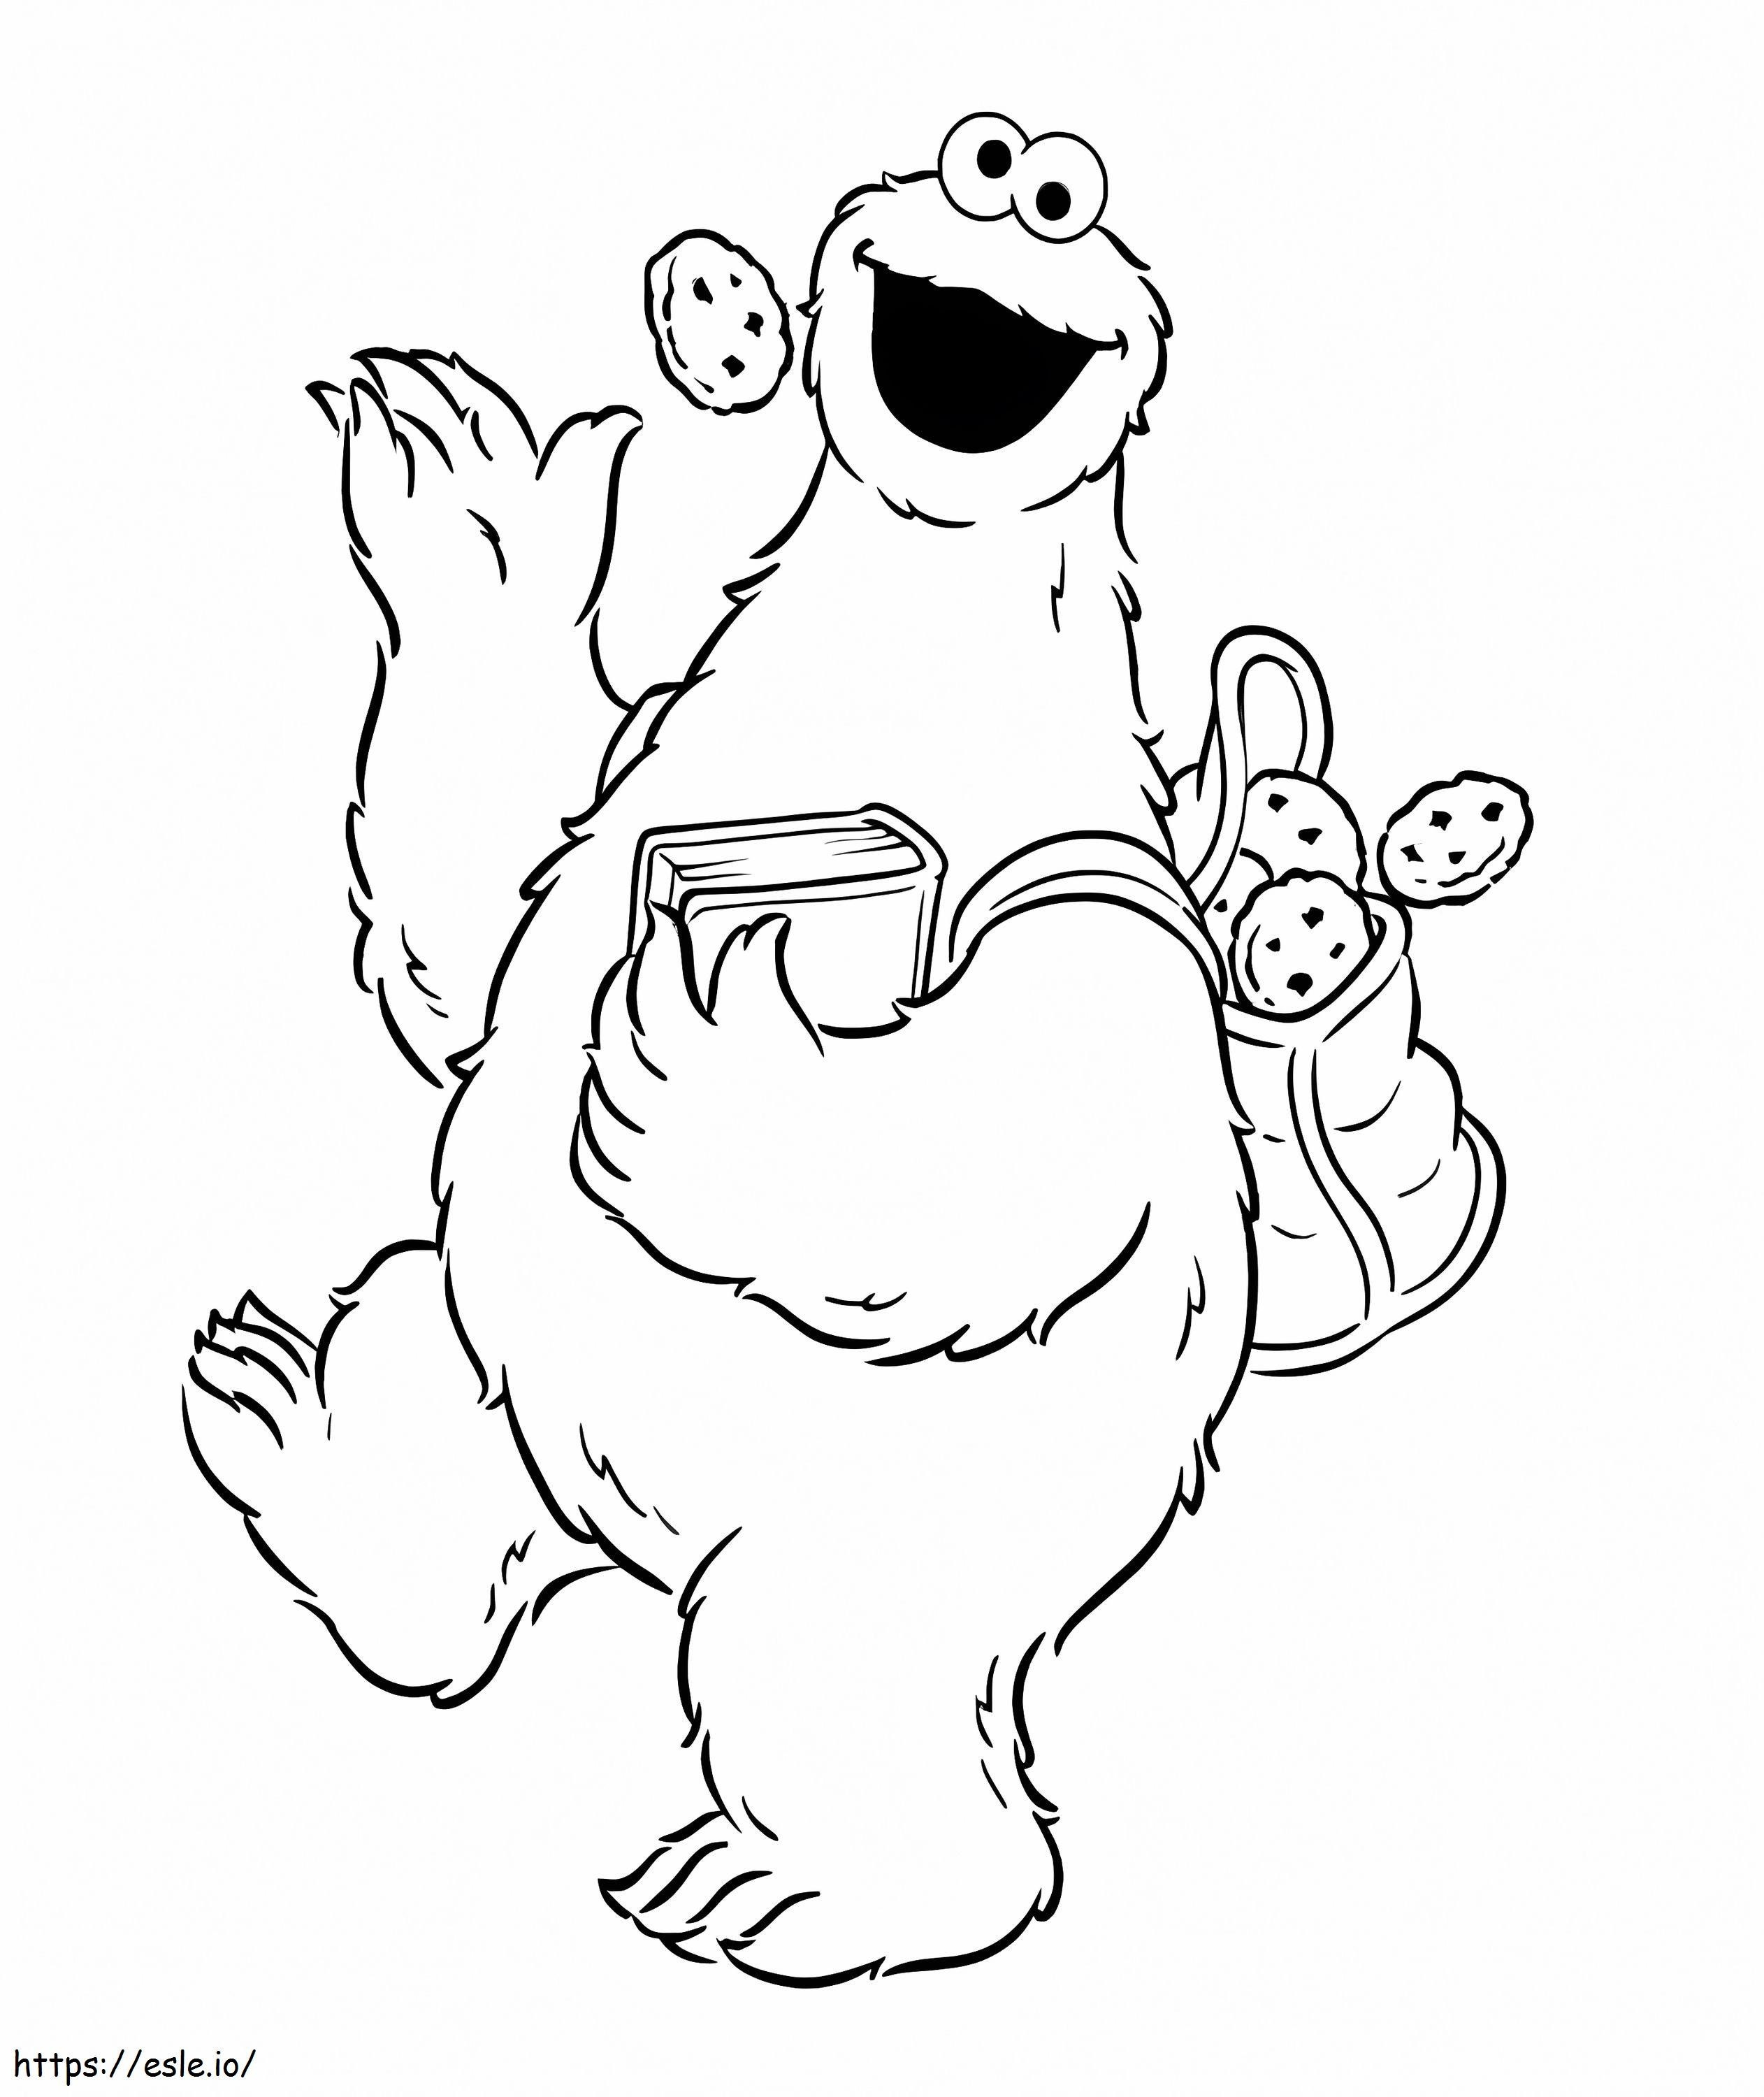 Cookie Monster Goes To School coloring page